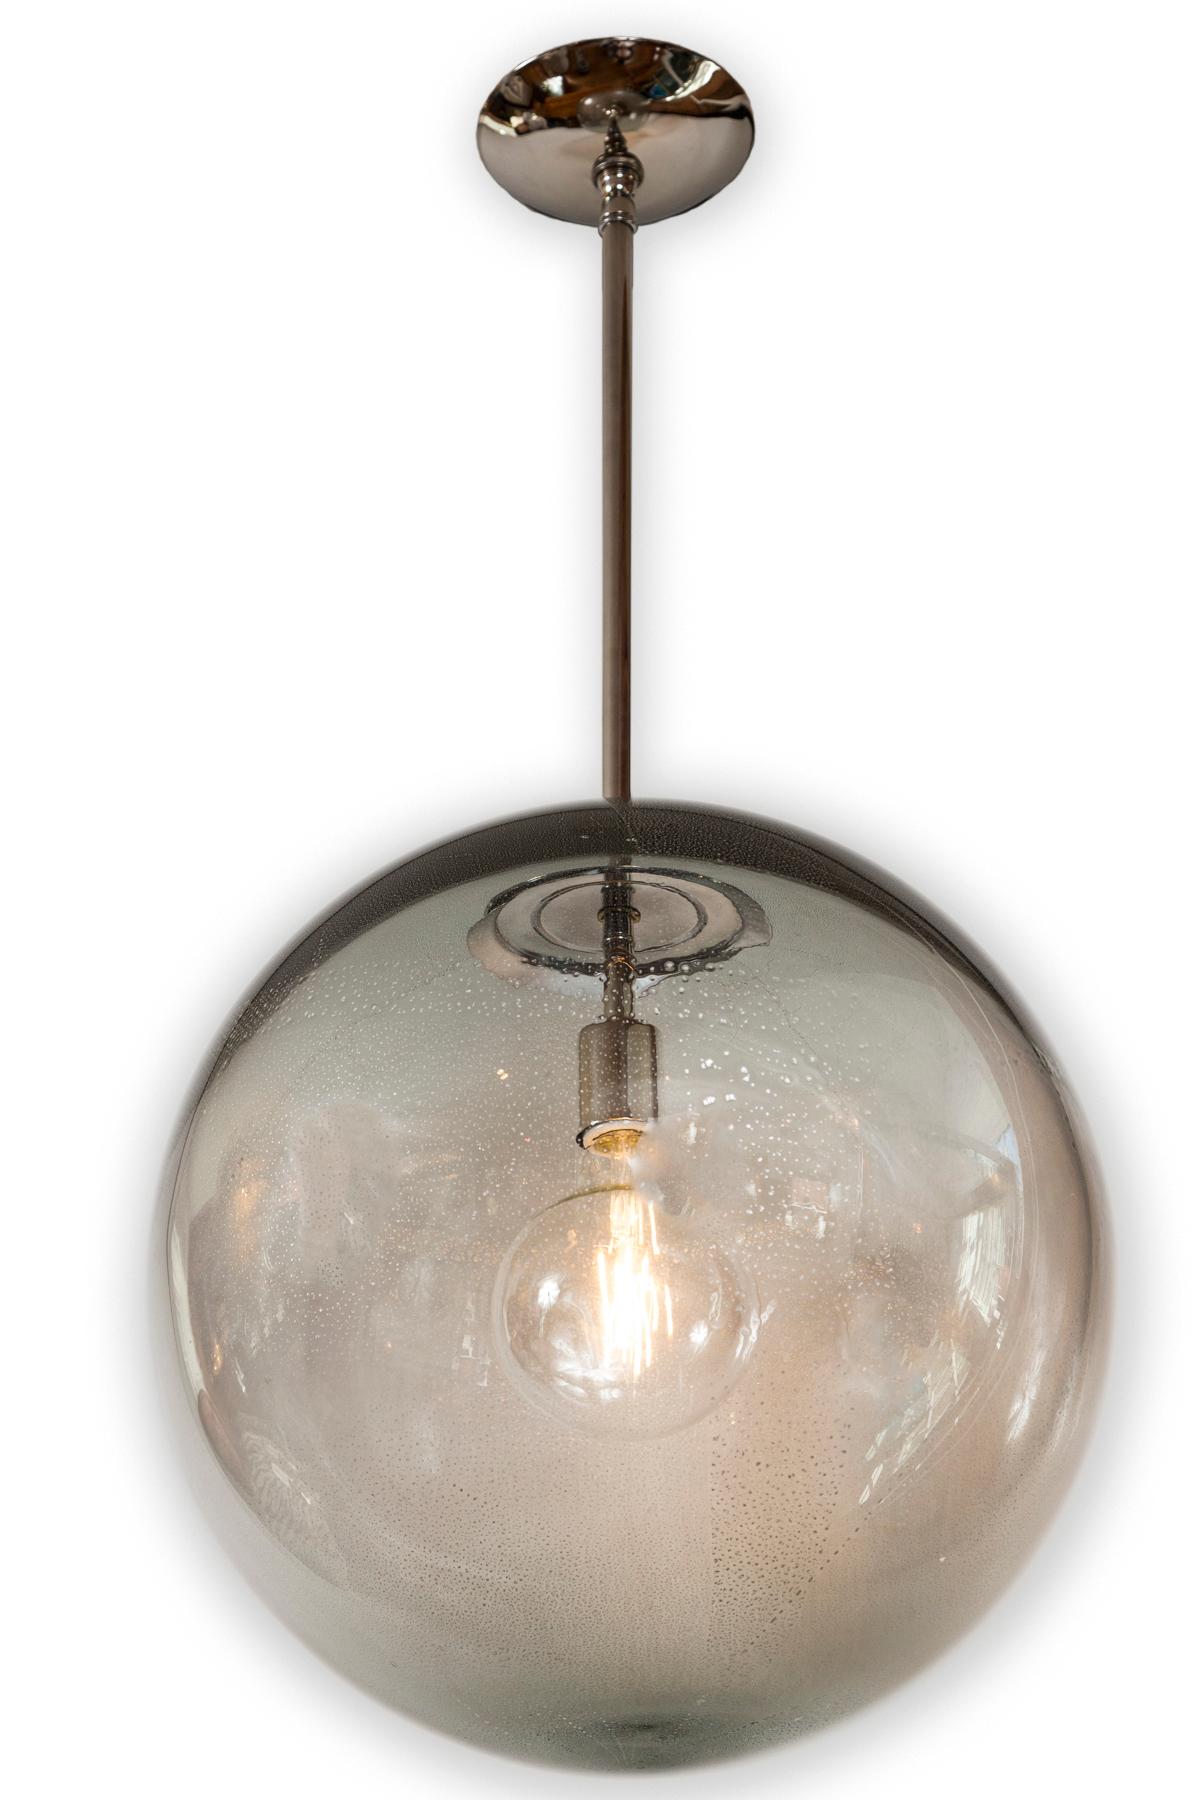 A wonderful pair of very large mouth blown globe shaped pendants in a light gray with silver.  The silver offers a subtle texture with speckling and light overall shimmery quality upon illumination.  Each globe while the same color are unique in its